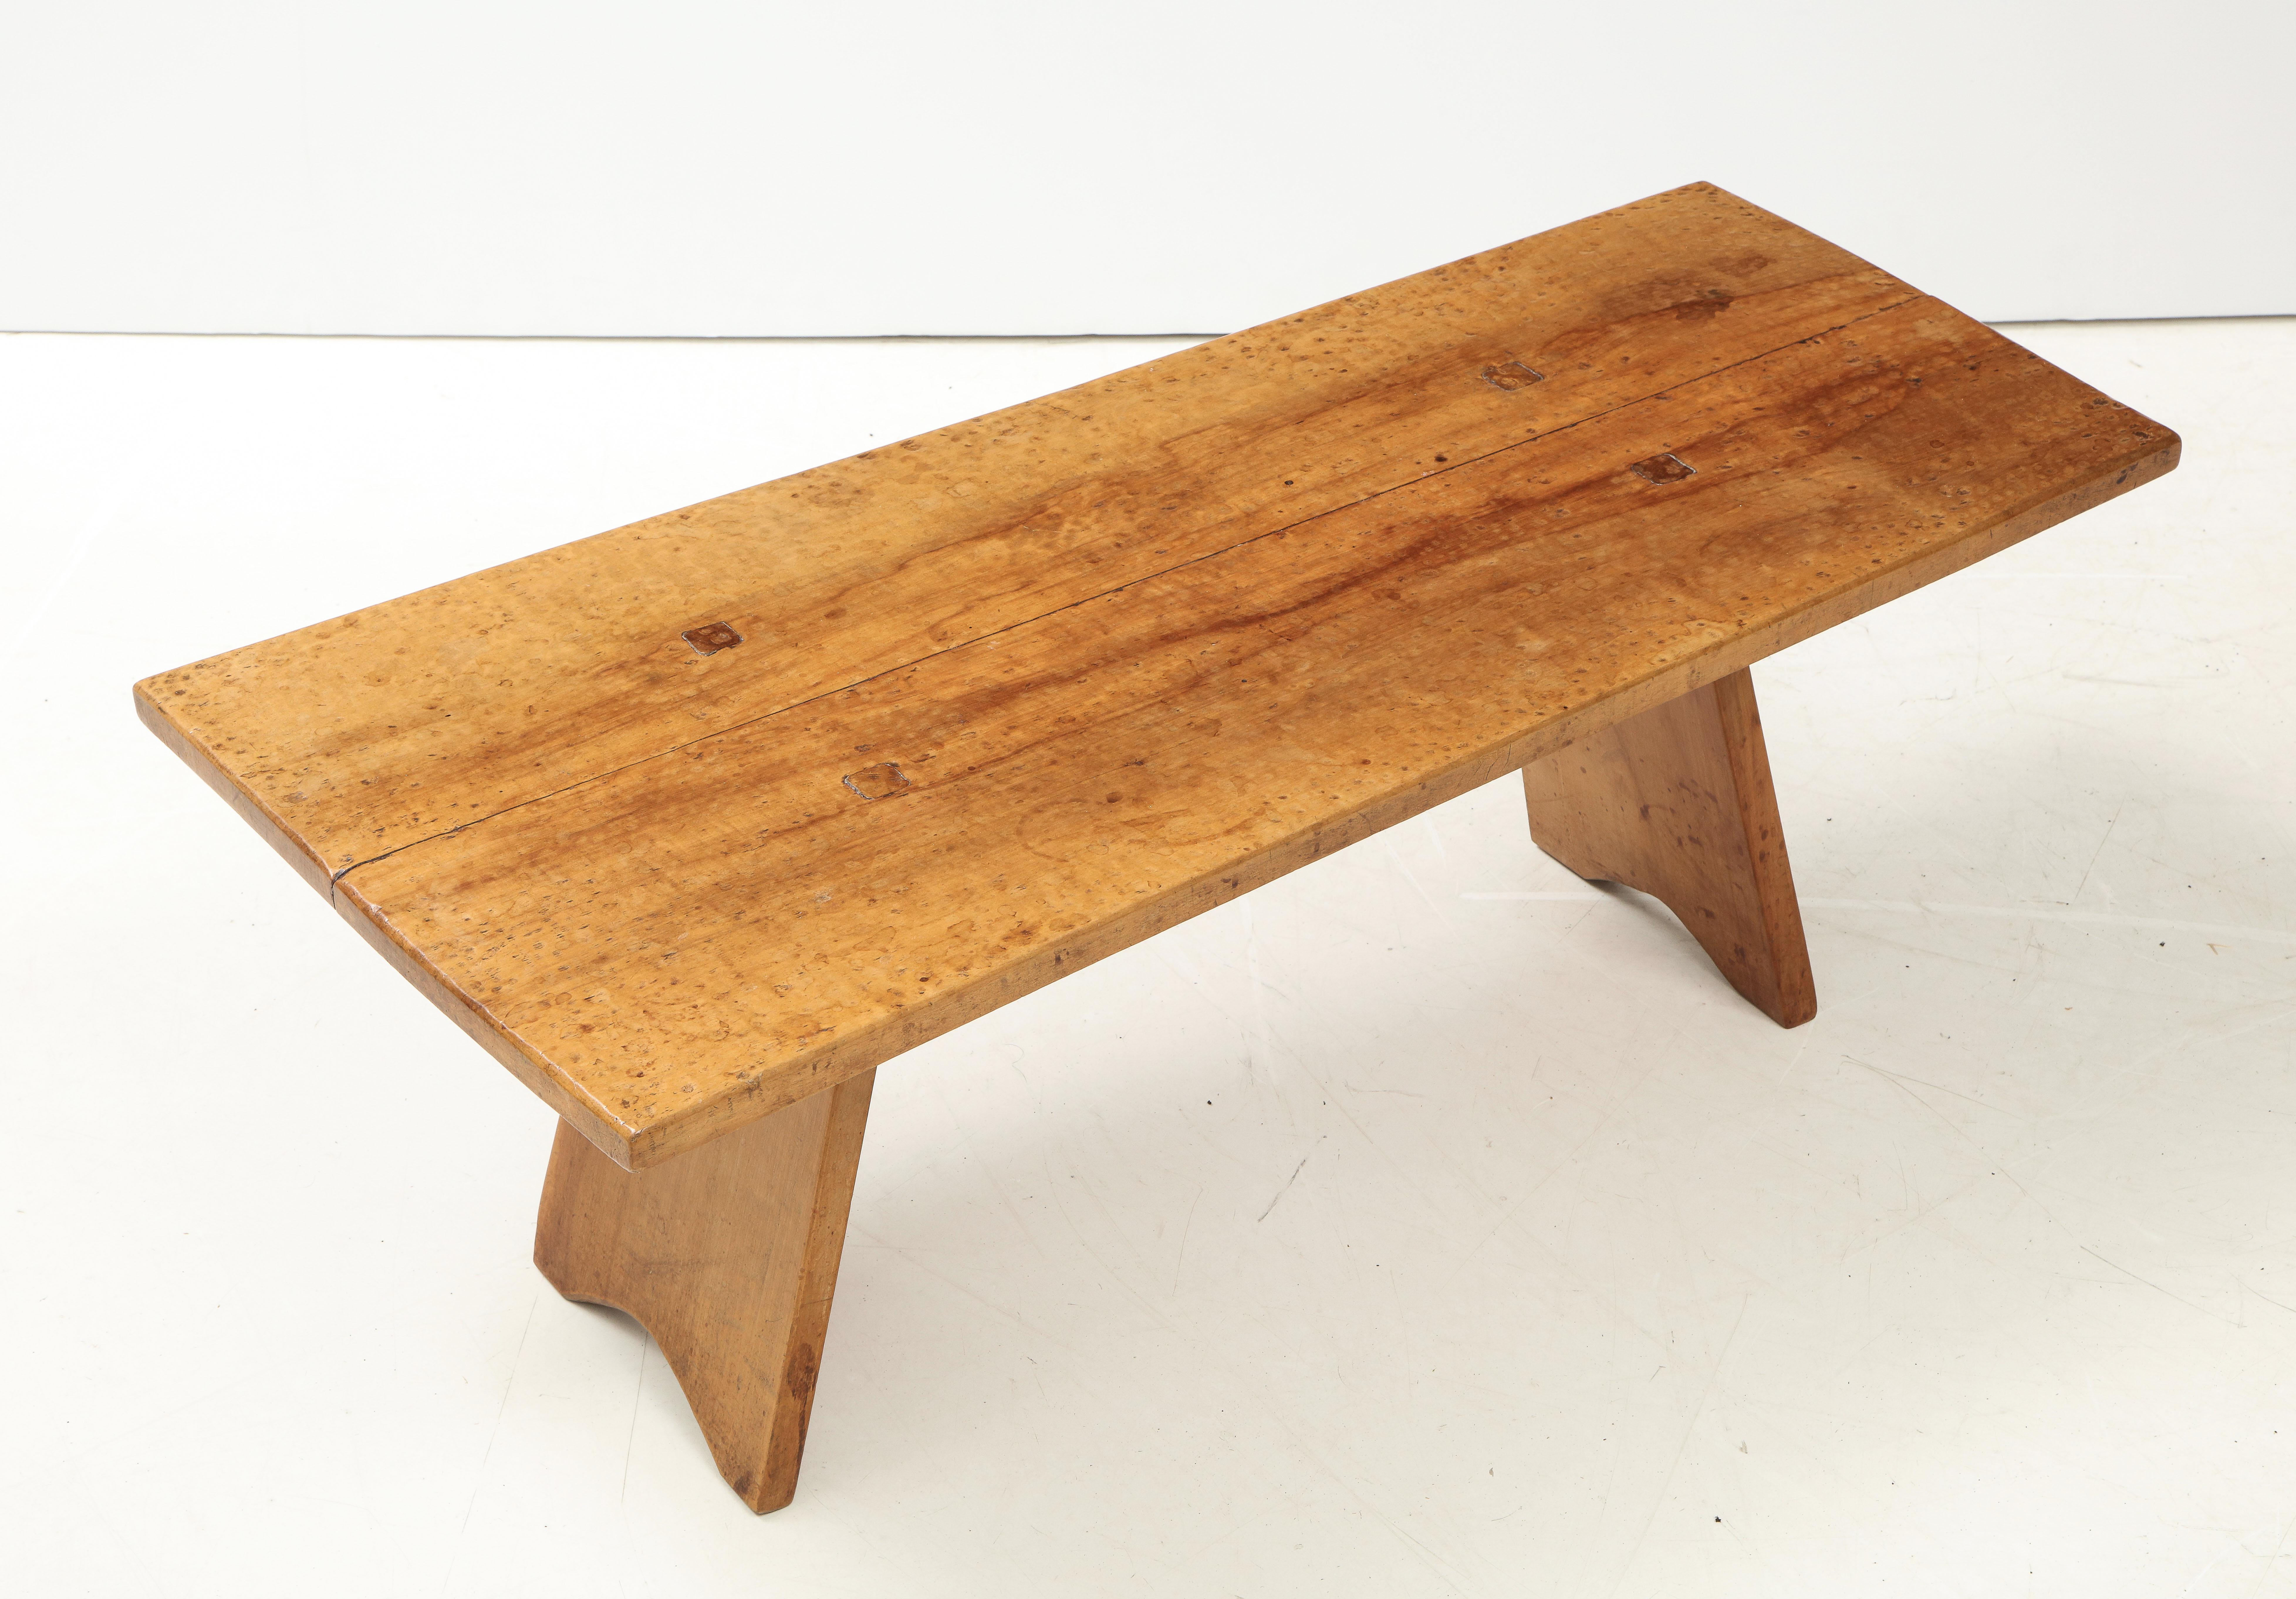 Atelier Marolles style coffee table, France, c. 1960
Walnut, hand-carved top

Measures: H 14.25, W 18, W2 15, L 38.5 in.
  